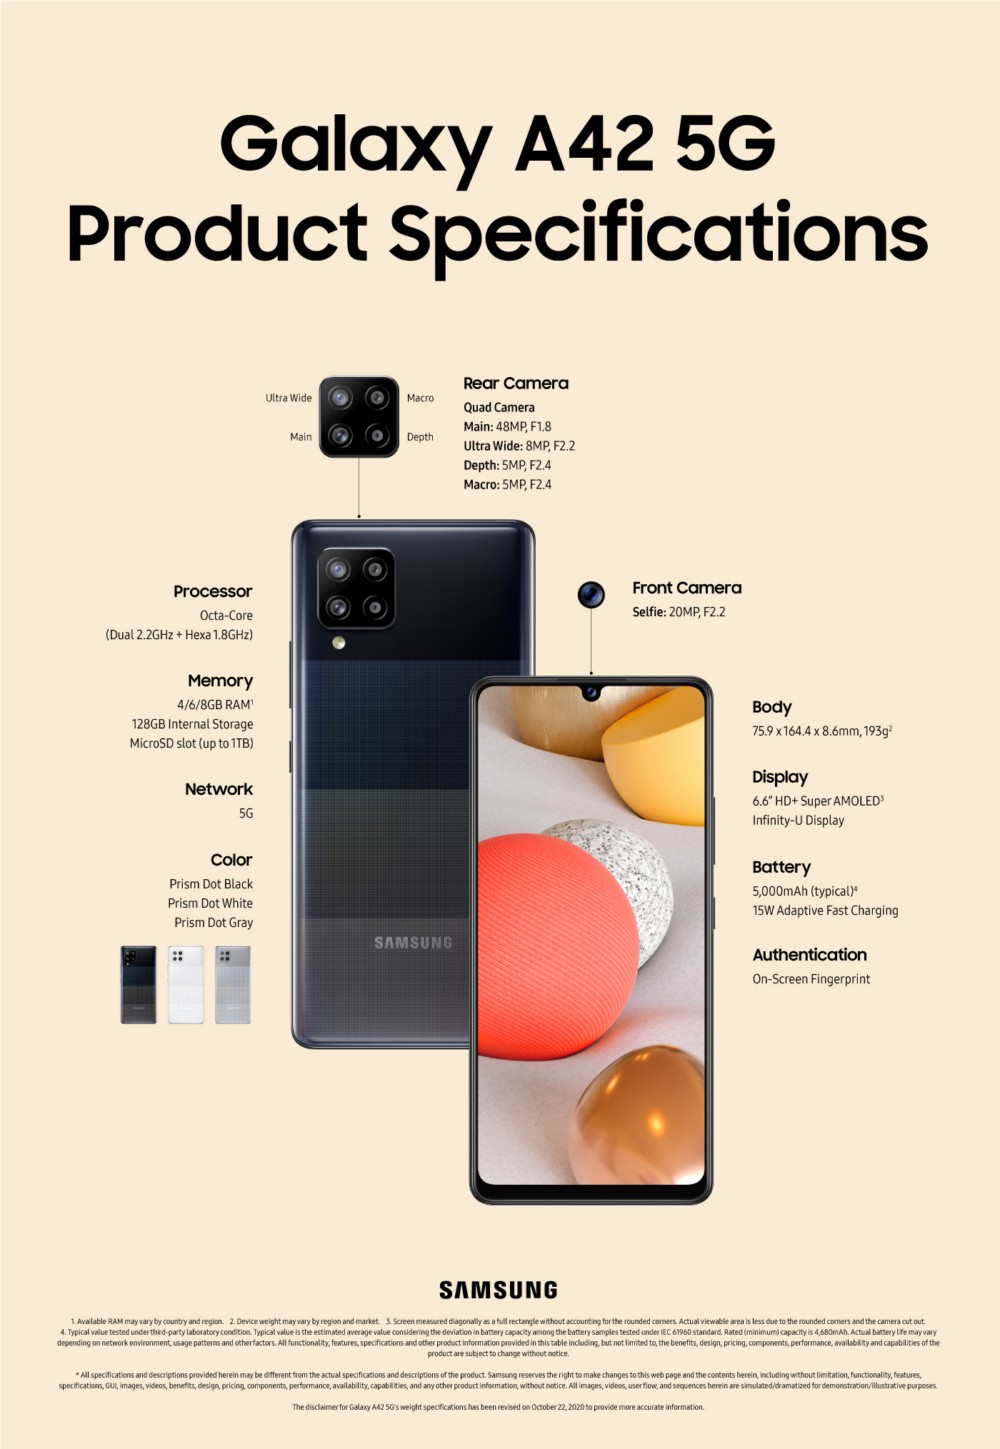 Galaxy A42 5G - Galaxy A42 5G product specifications - ภาพที่ 13